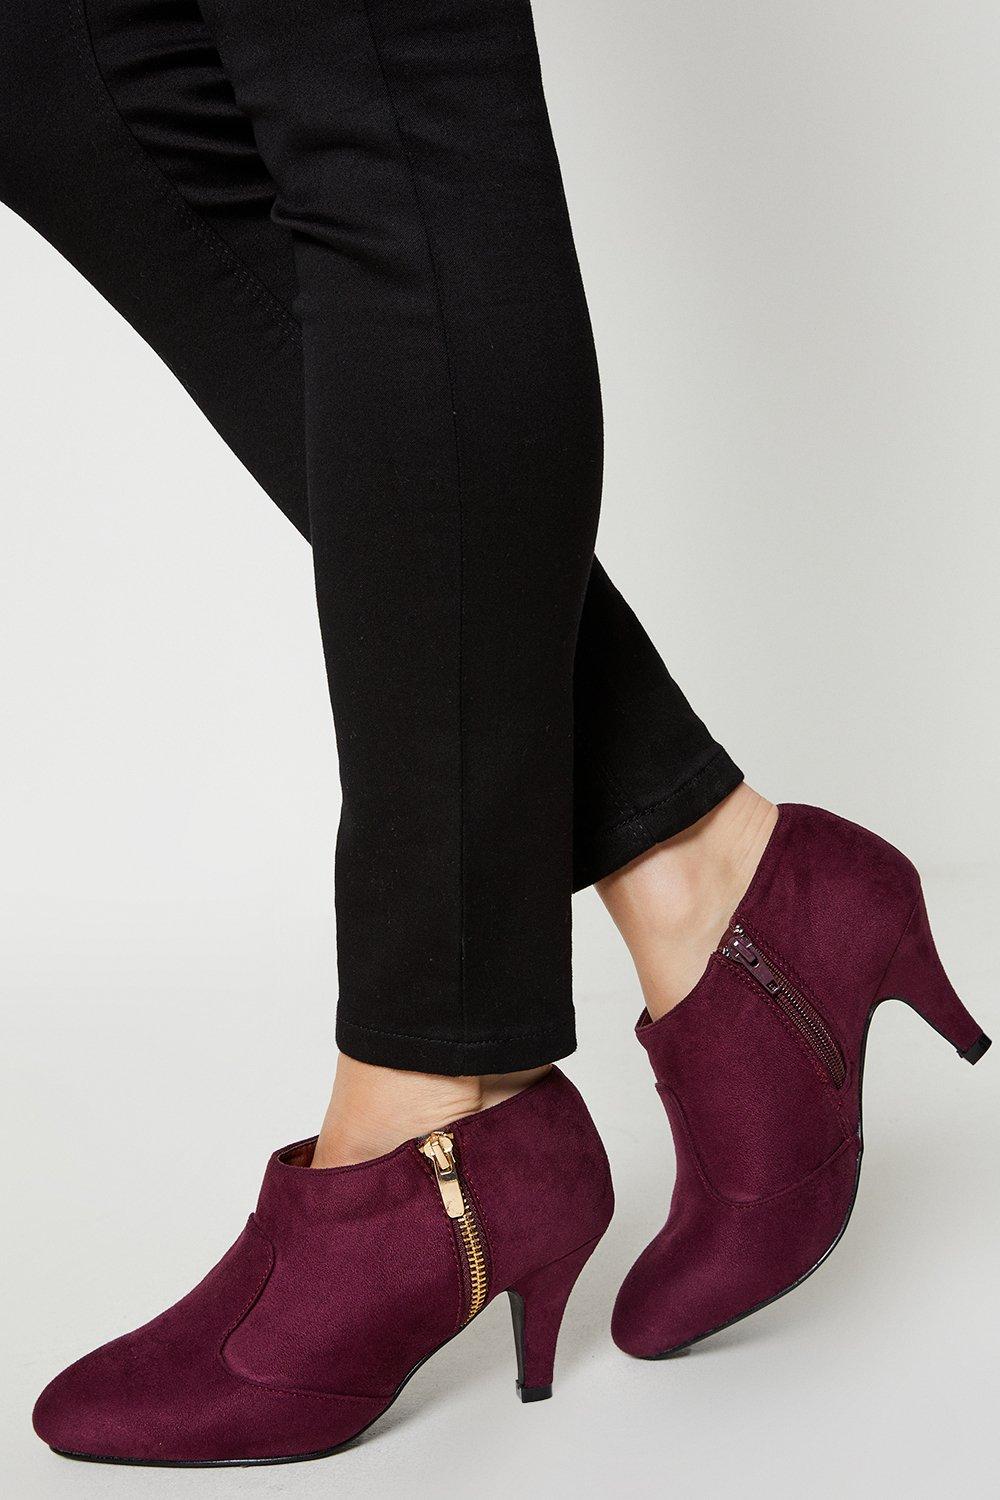 Women’s Good For The Sole: Wide Fit Marley Comfort Zip Heeled Ankle Boots - burgundy - 5